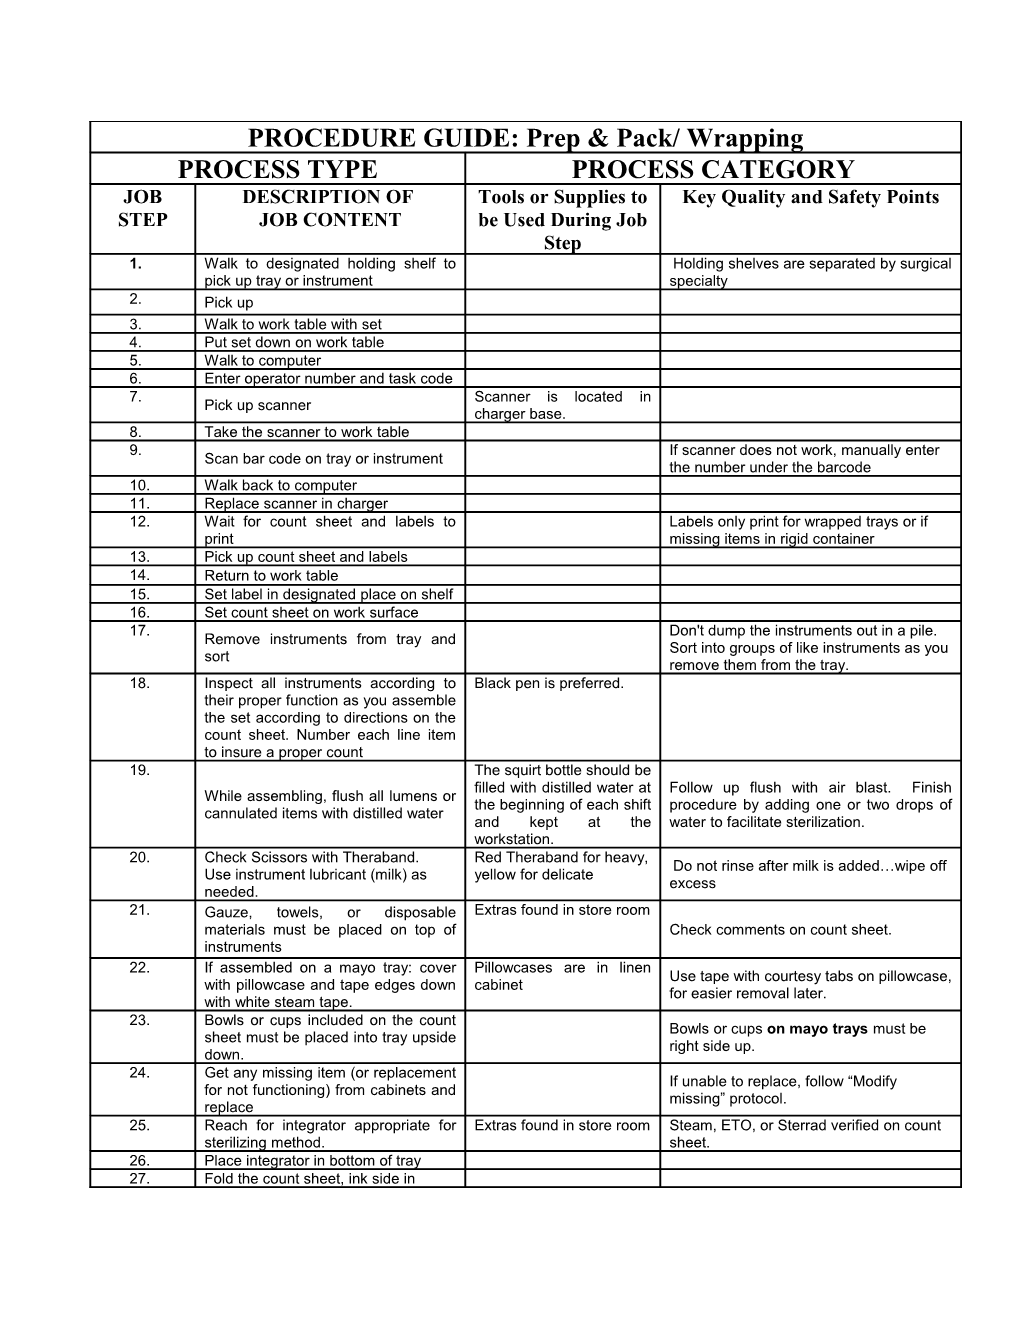 JOB GUIDANCE SHEET: Prep & Pack/ Wrapping